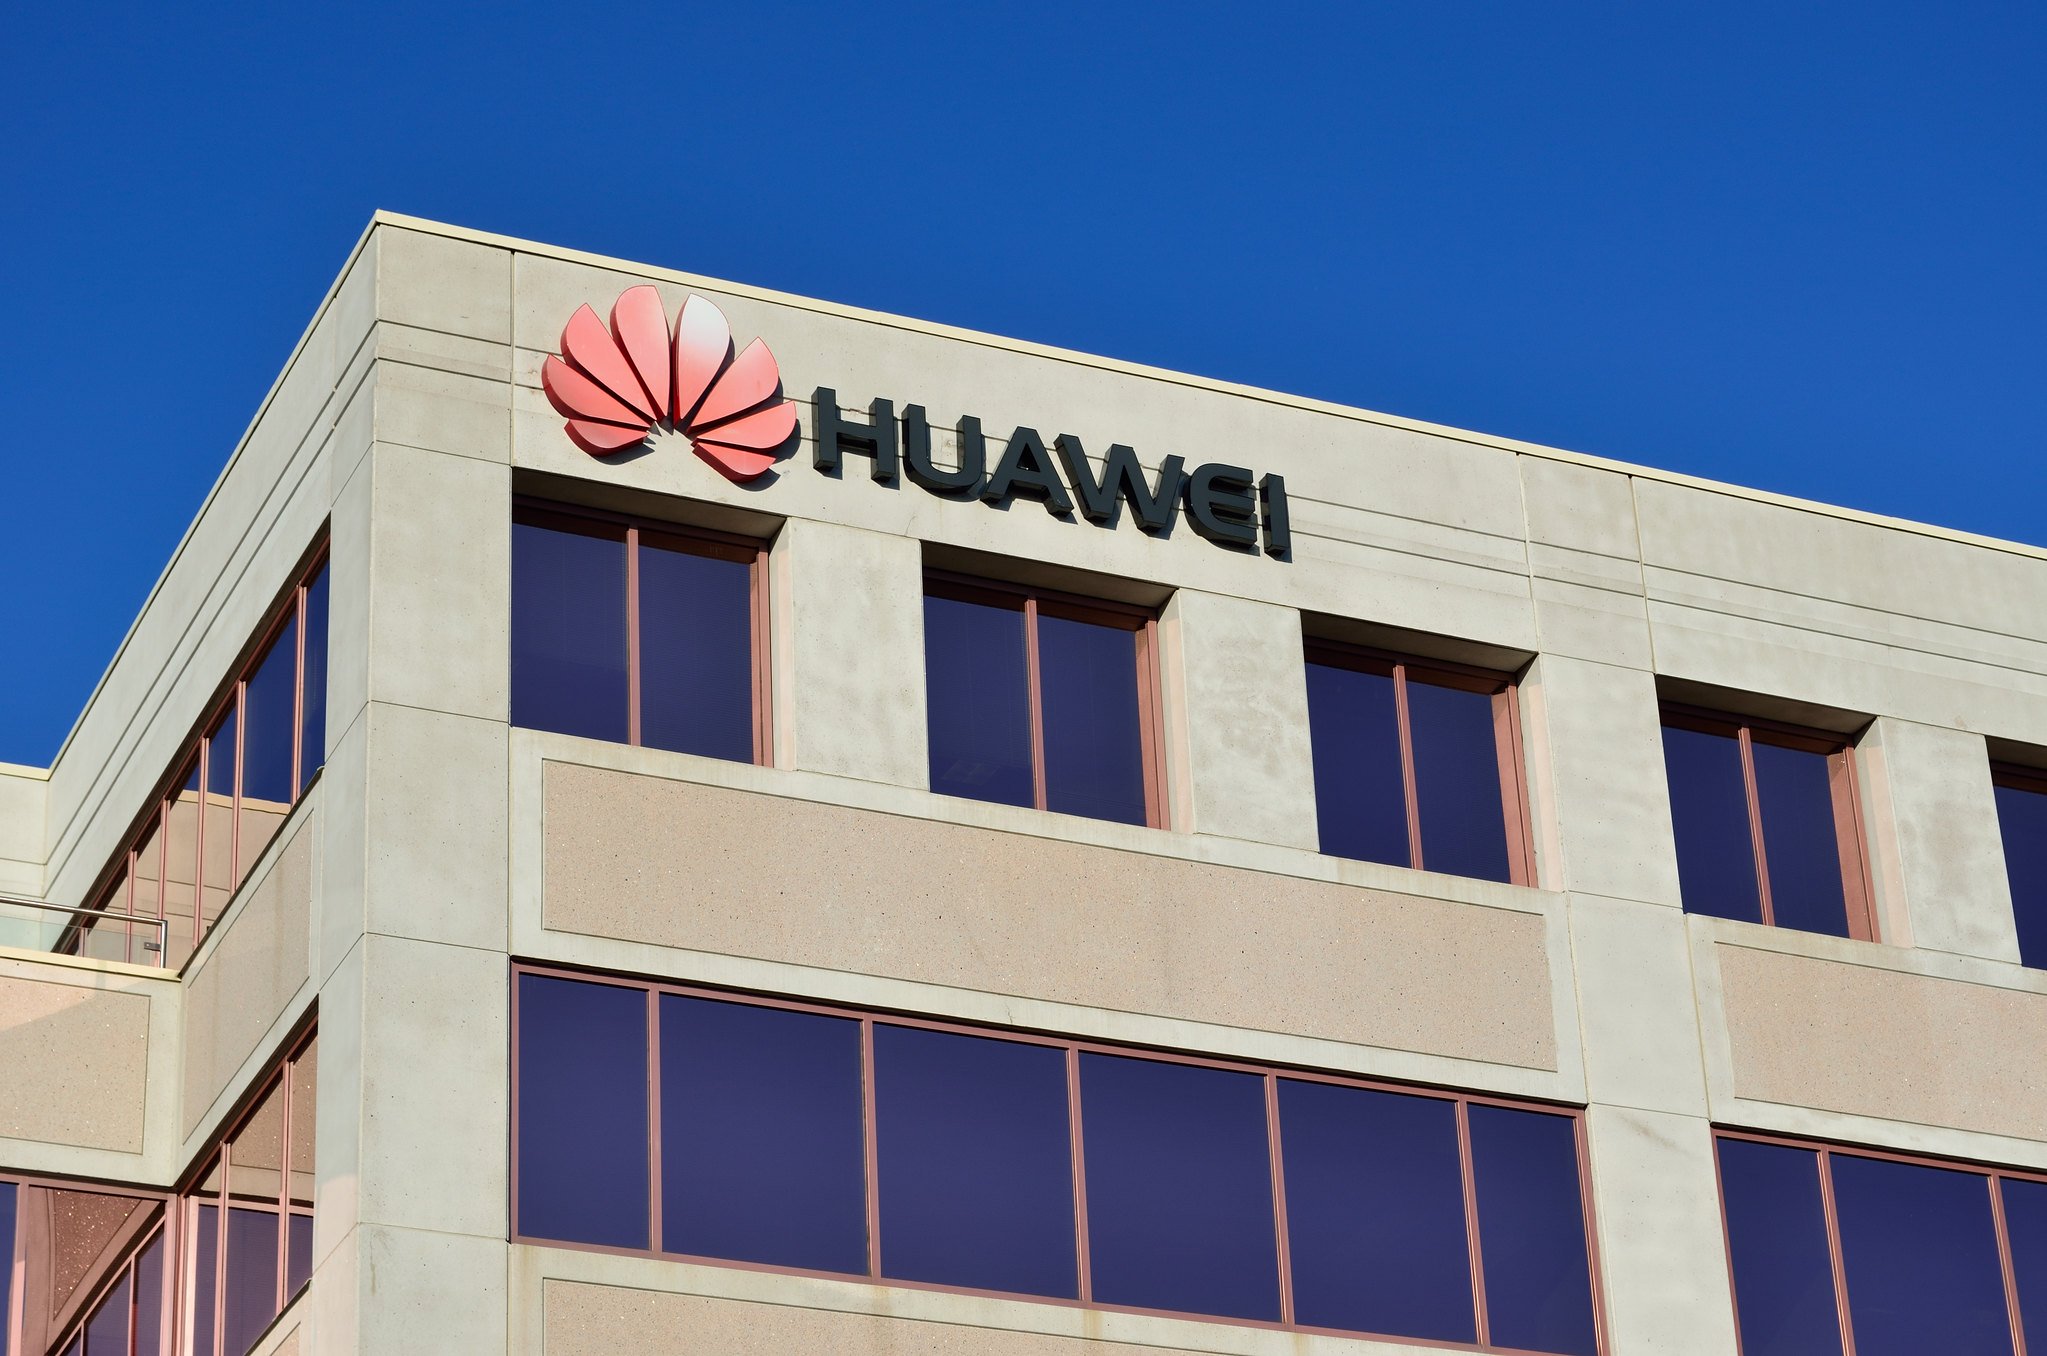 Huawei has been abandoned by chipmakers in China: Report